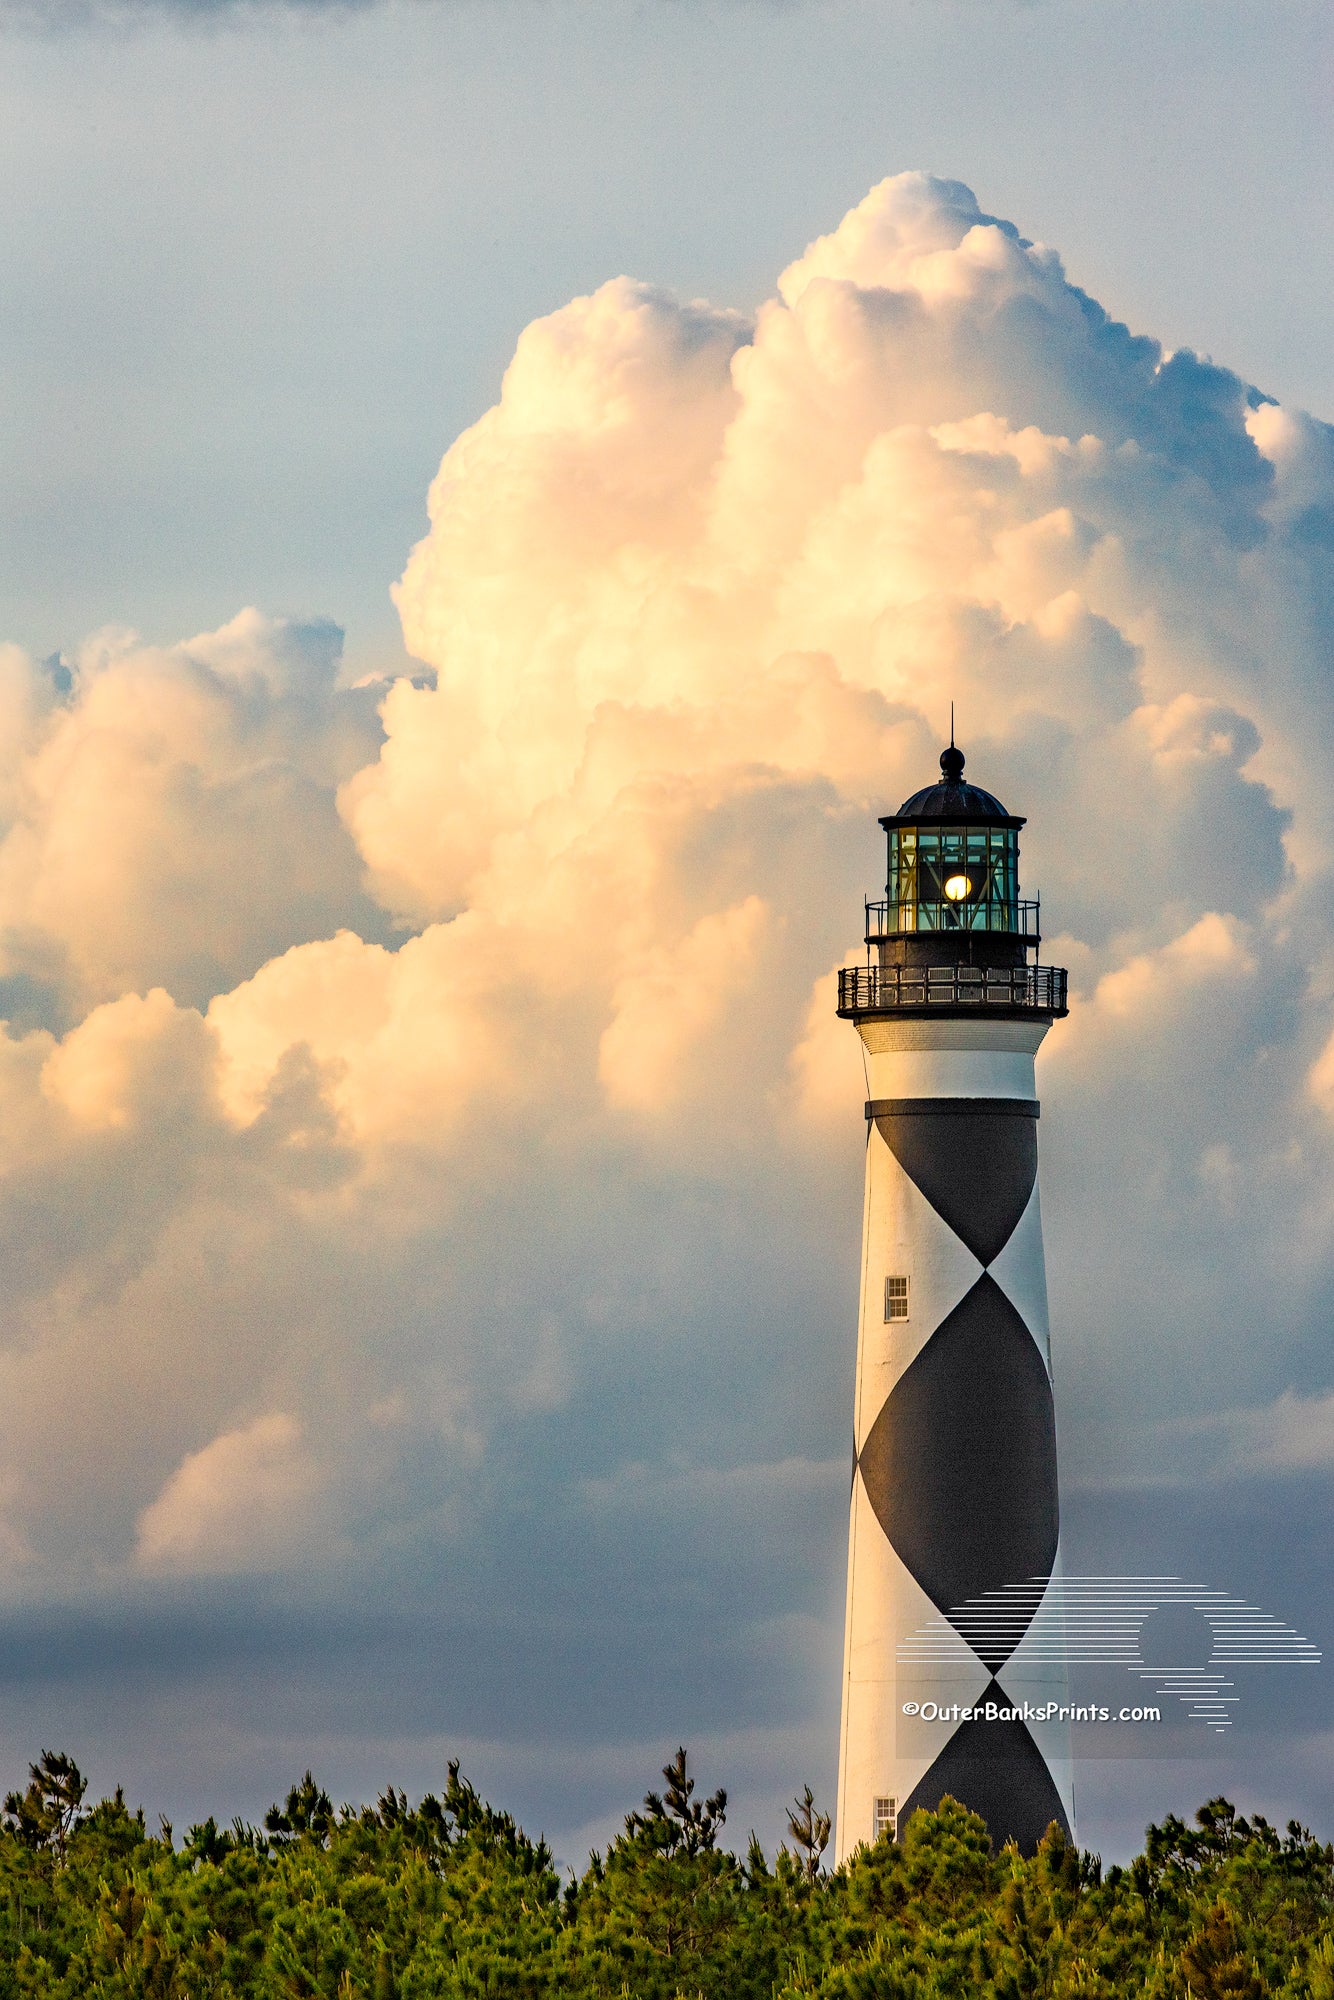 Late afternoon clouds forming over Cape Lookout Lighthouse on the Core Banksof NC.